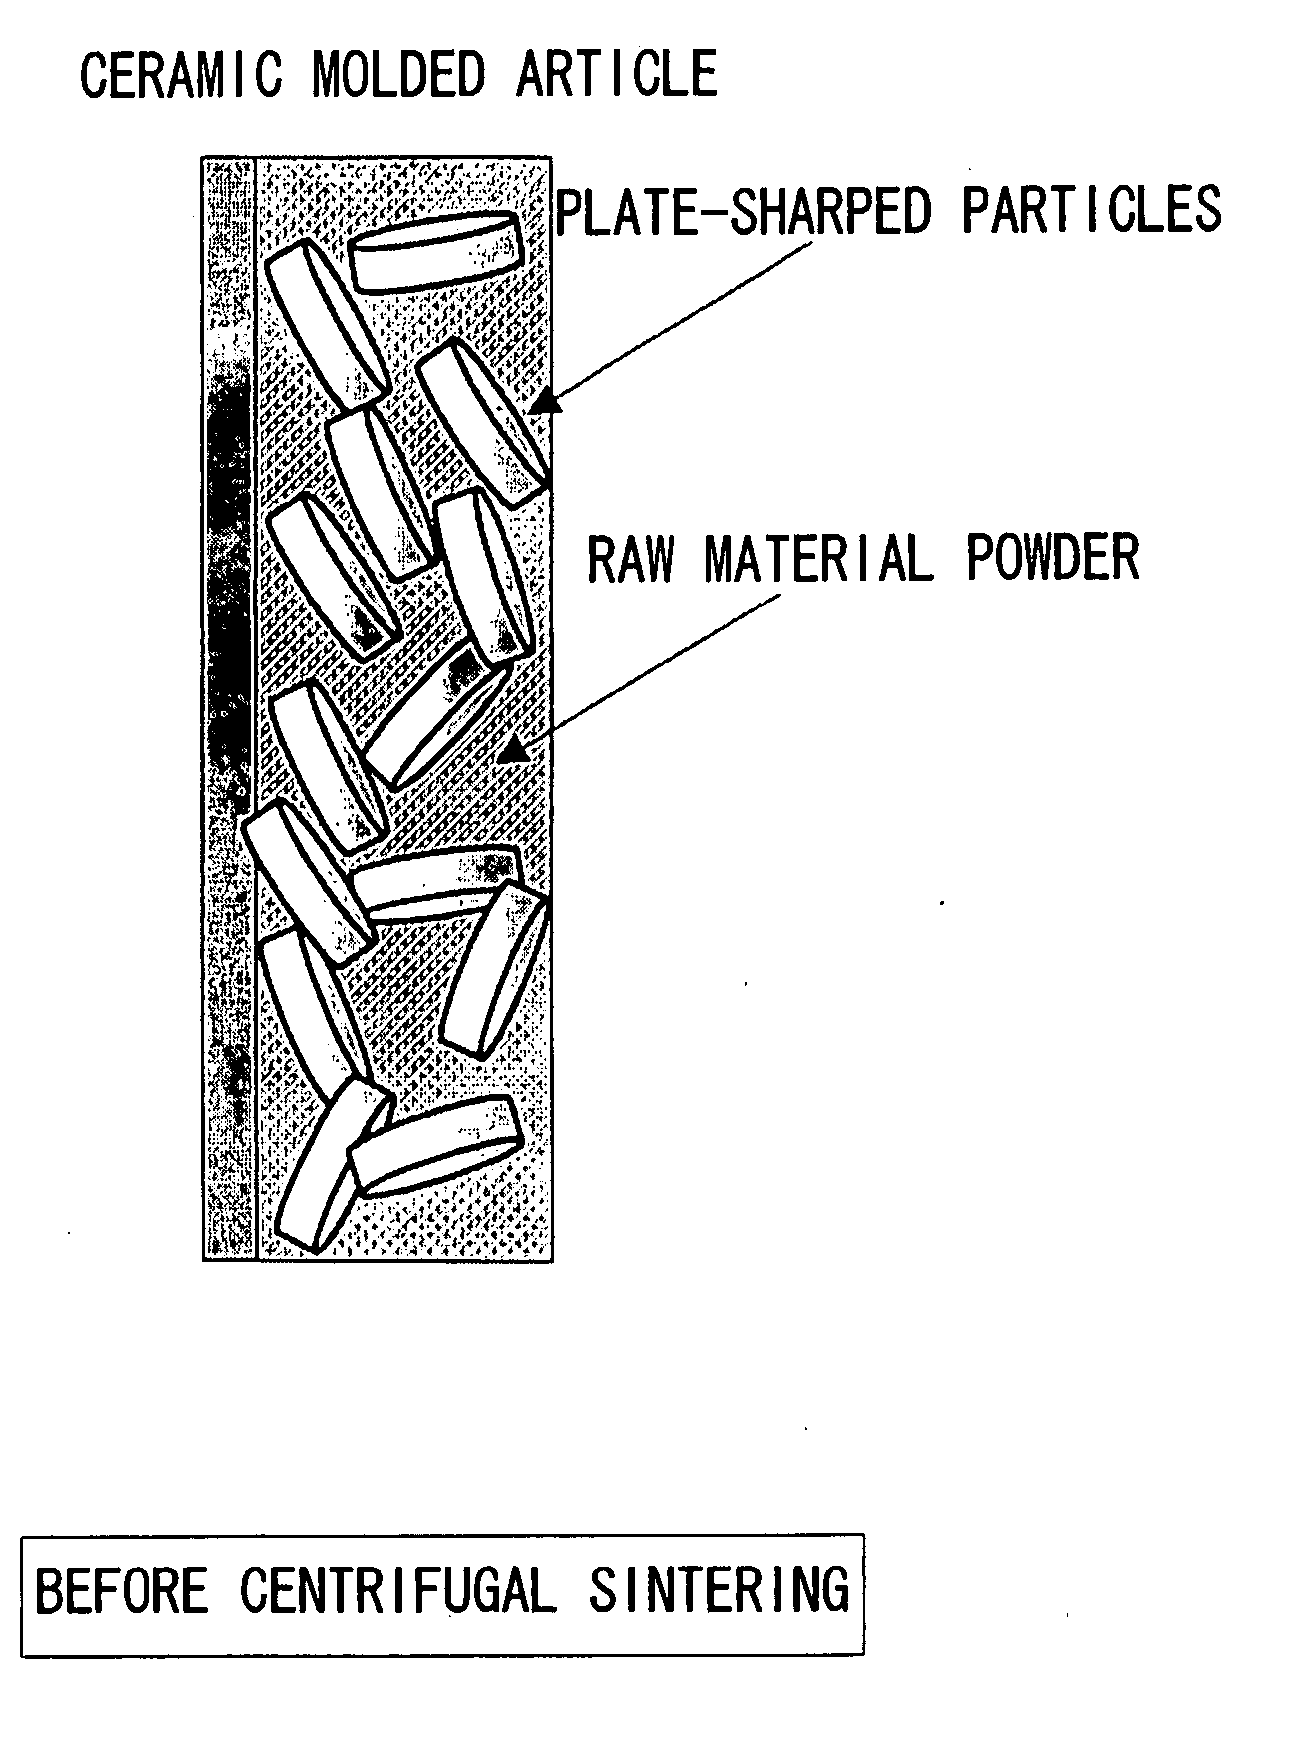 Production of oriented material or composite matrial through centrifugal burning